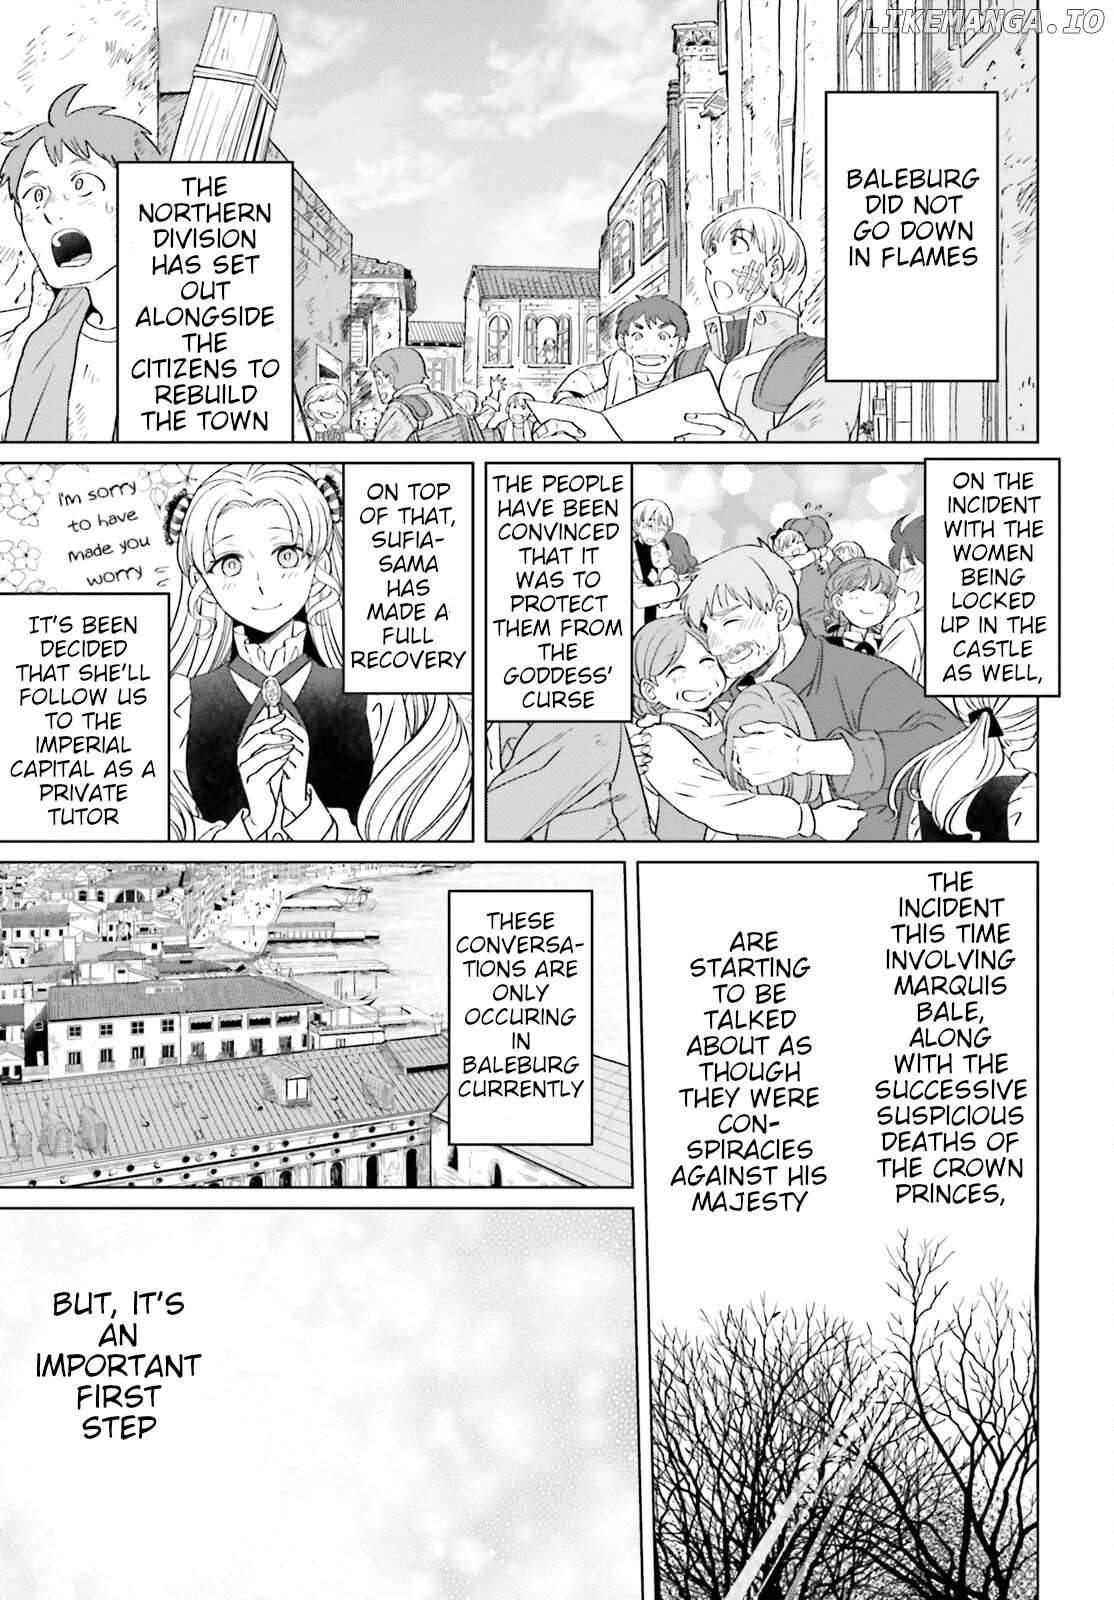 Win Over The Dragon Emperor This Time Around, Noble Girl! chapter 15 - page 17